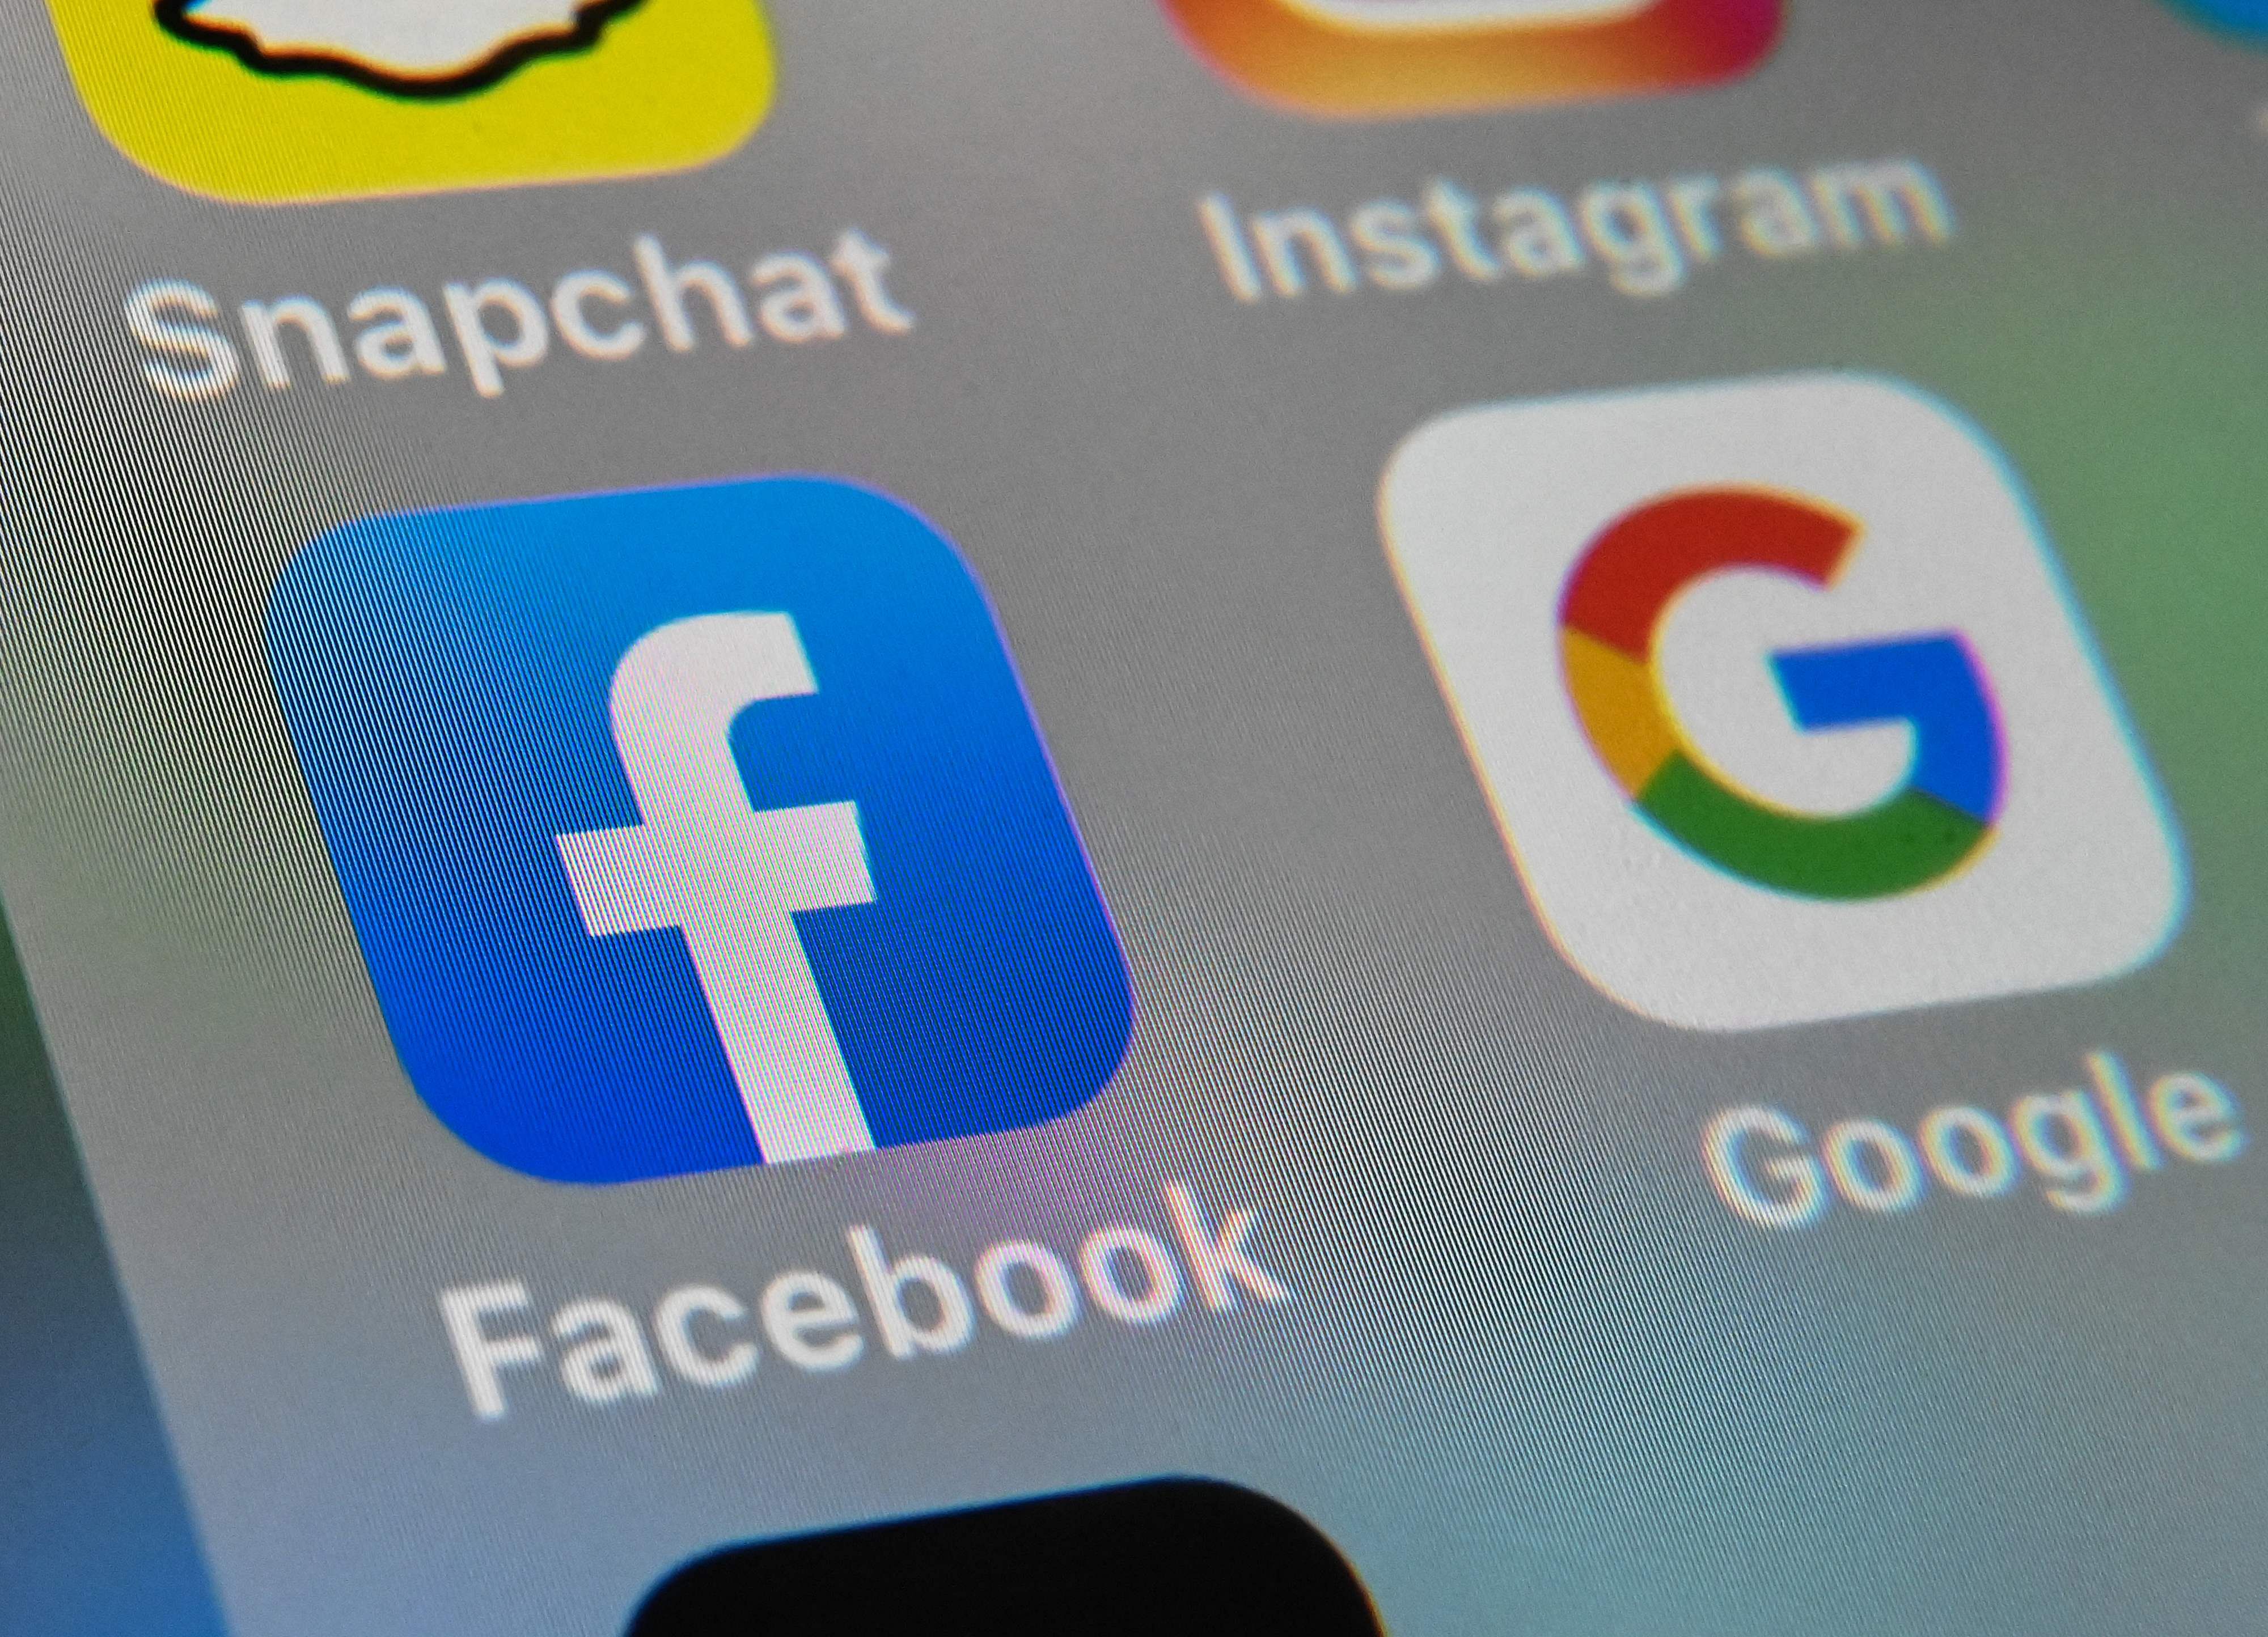 At the same time, tech companies and civil rights groups say the new rules are an invitation to abuse and censorship, as well as a burdensome requirement on new and growing companies. (Credit: AFP Photo)